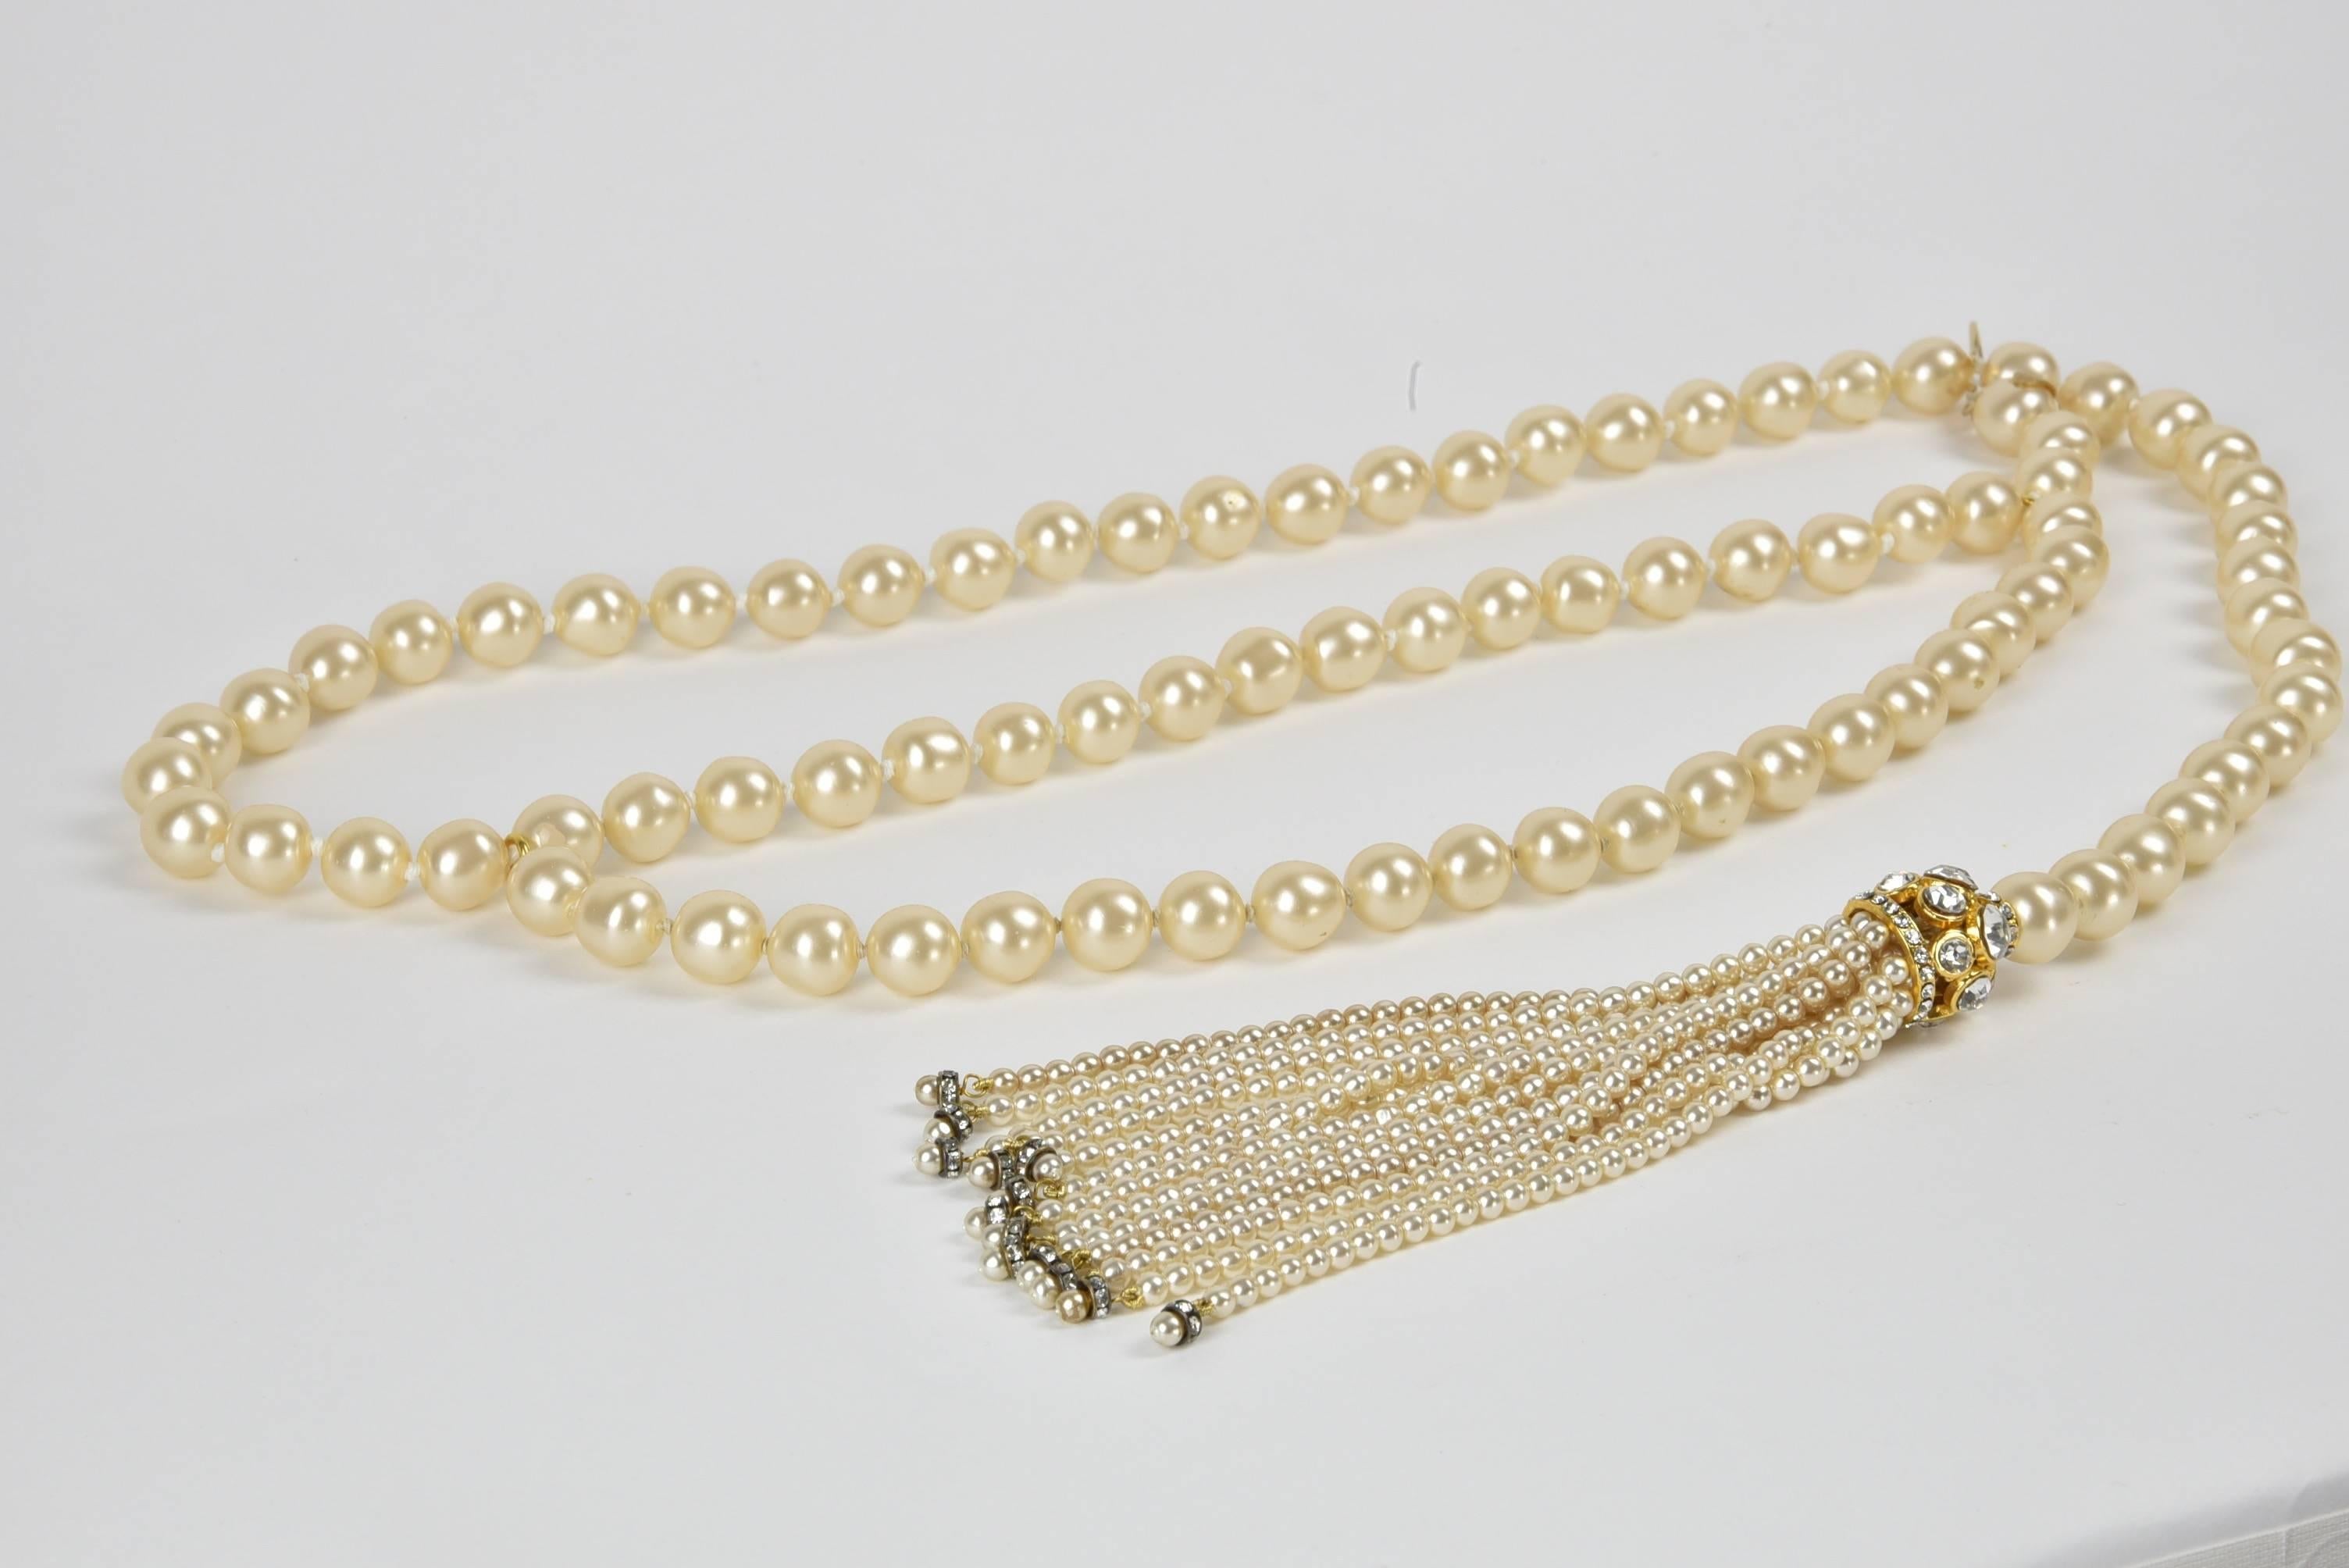 The most dramatic and beautiful tassels ever made by Chanel!
Spectacular  jeweled pearl and rhinestone tassel belt with matching earrings which brush shoulder top. Rare opportunity to have matching set
Total Troy ounce weight of belt and earrings